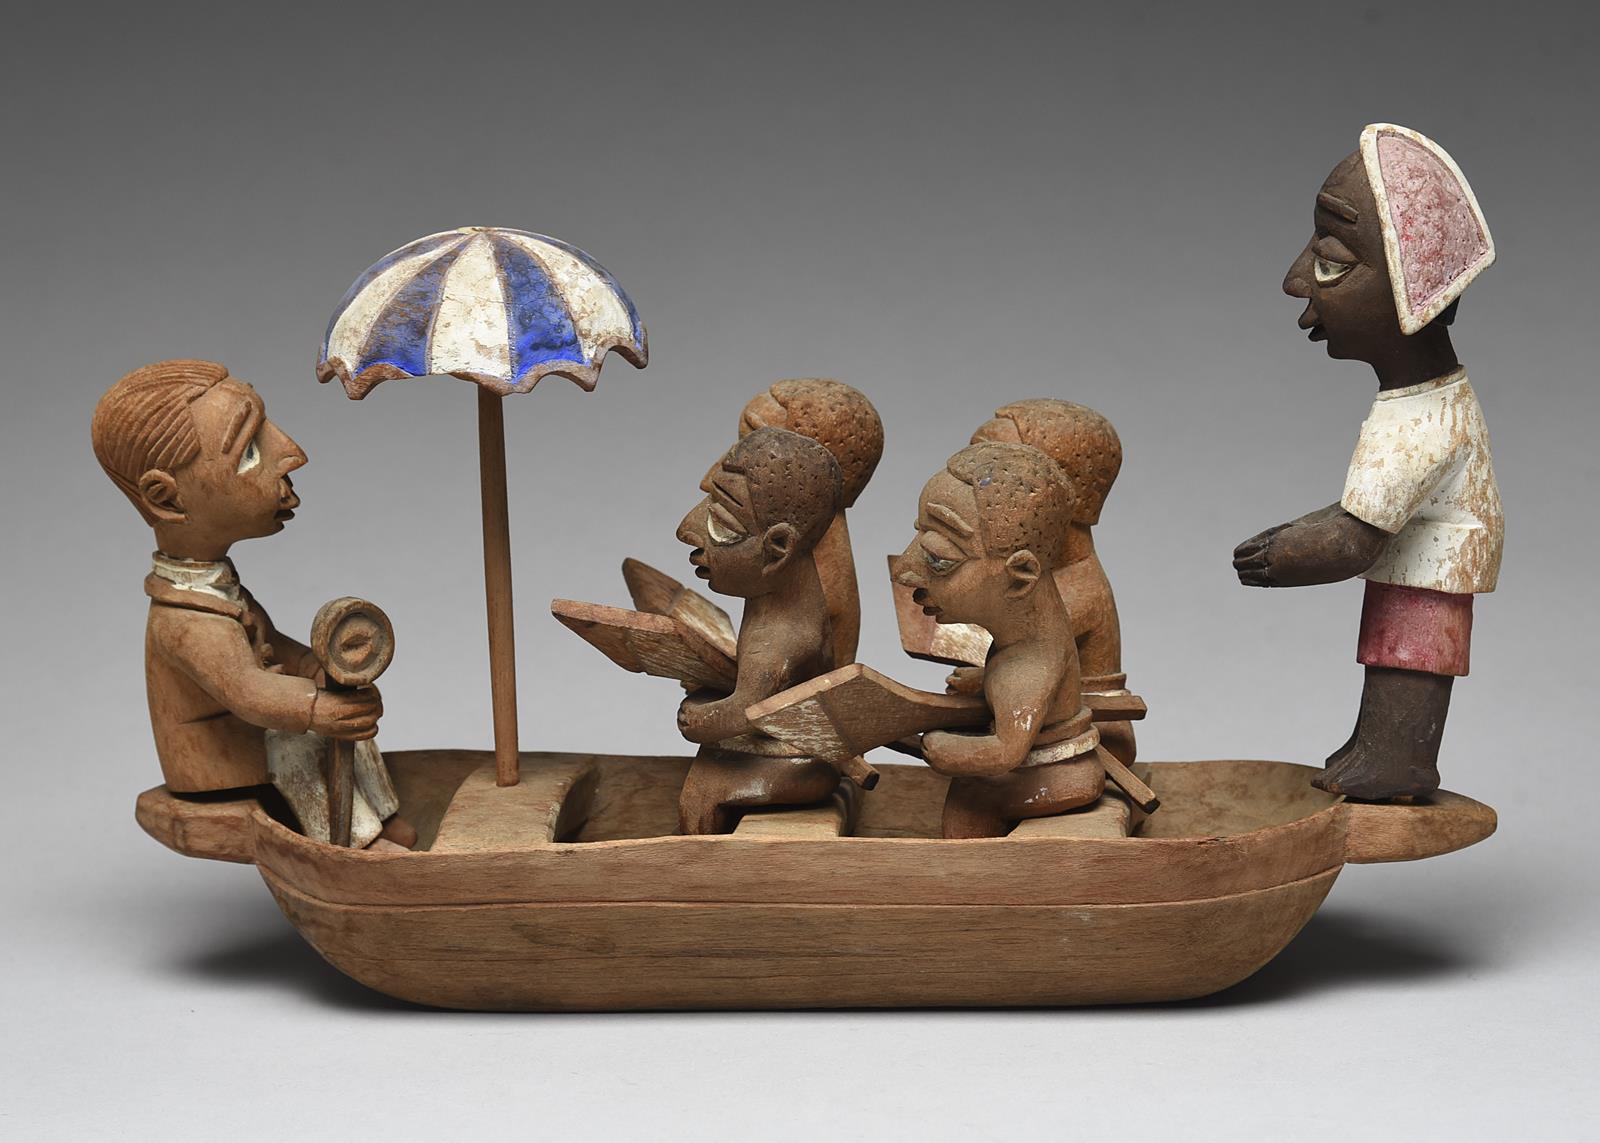 A Yoruba boat group by Thomas Ona Nigeria with a tiller man, four oarsmen with oars, an umbrella and - Image 2 of 4